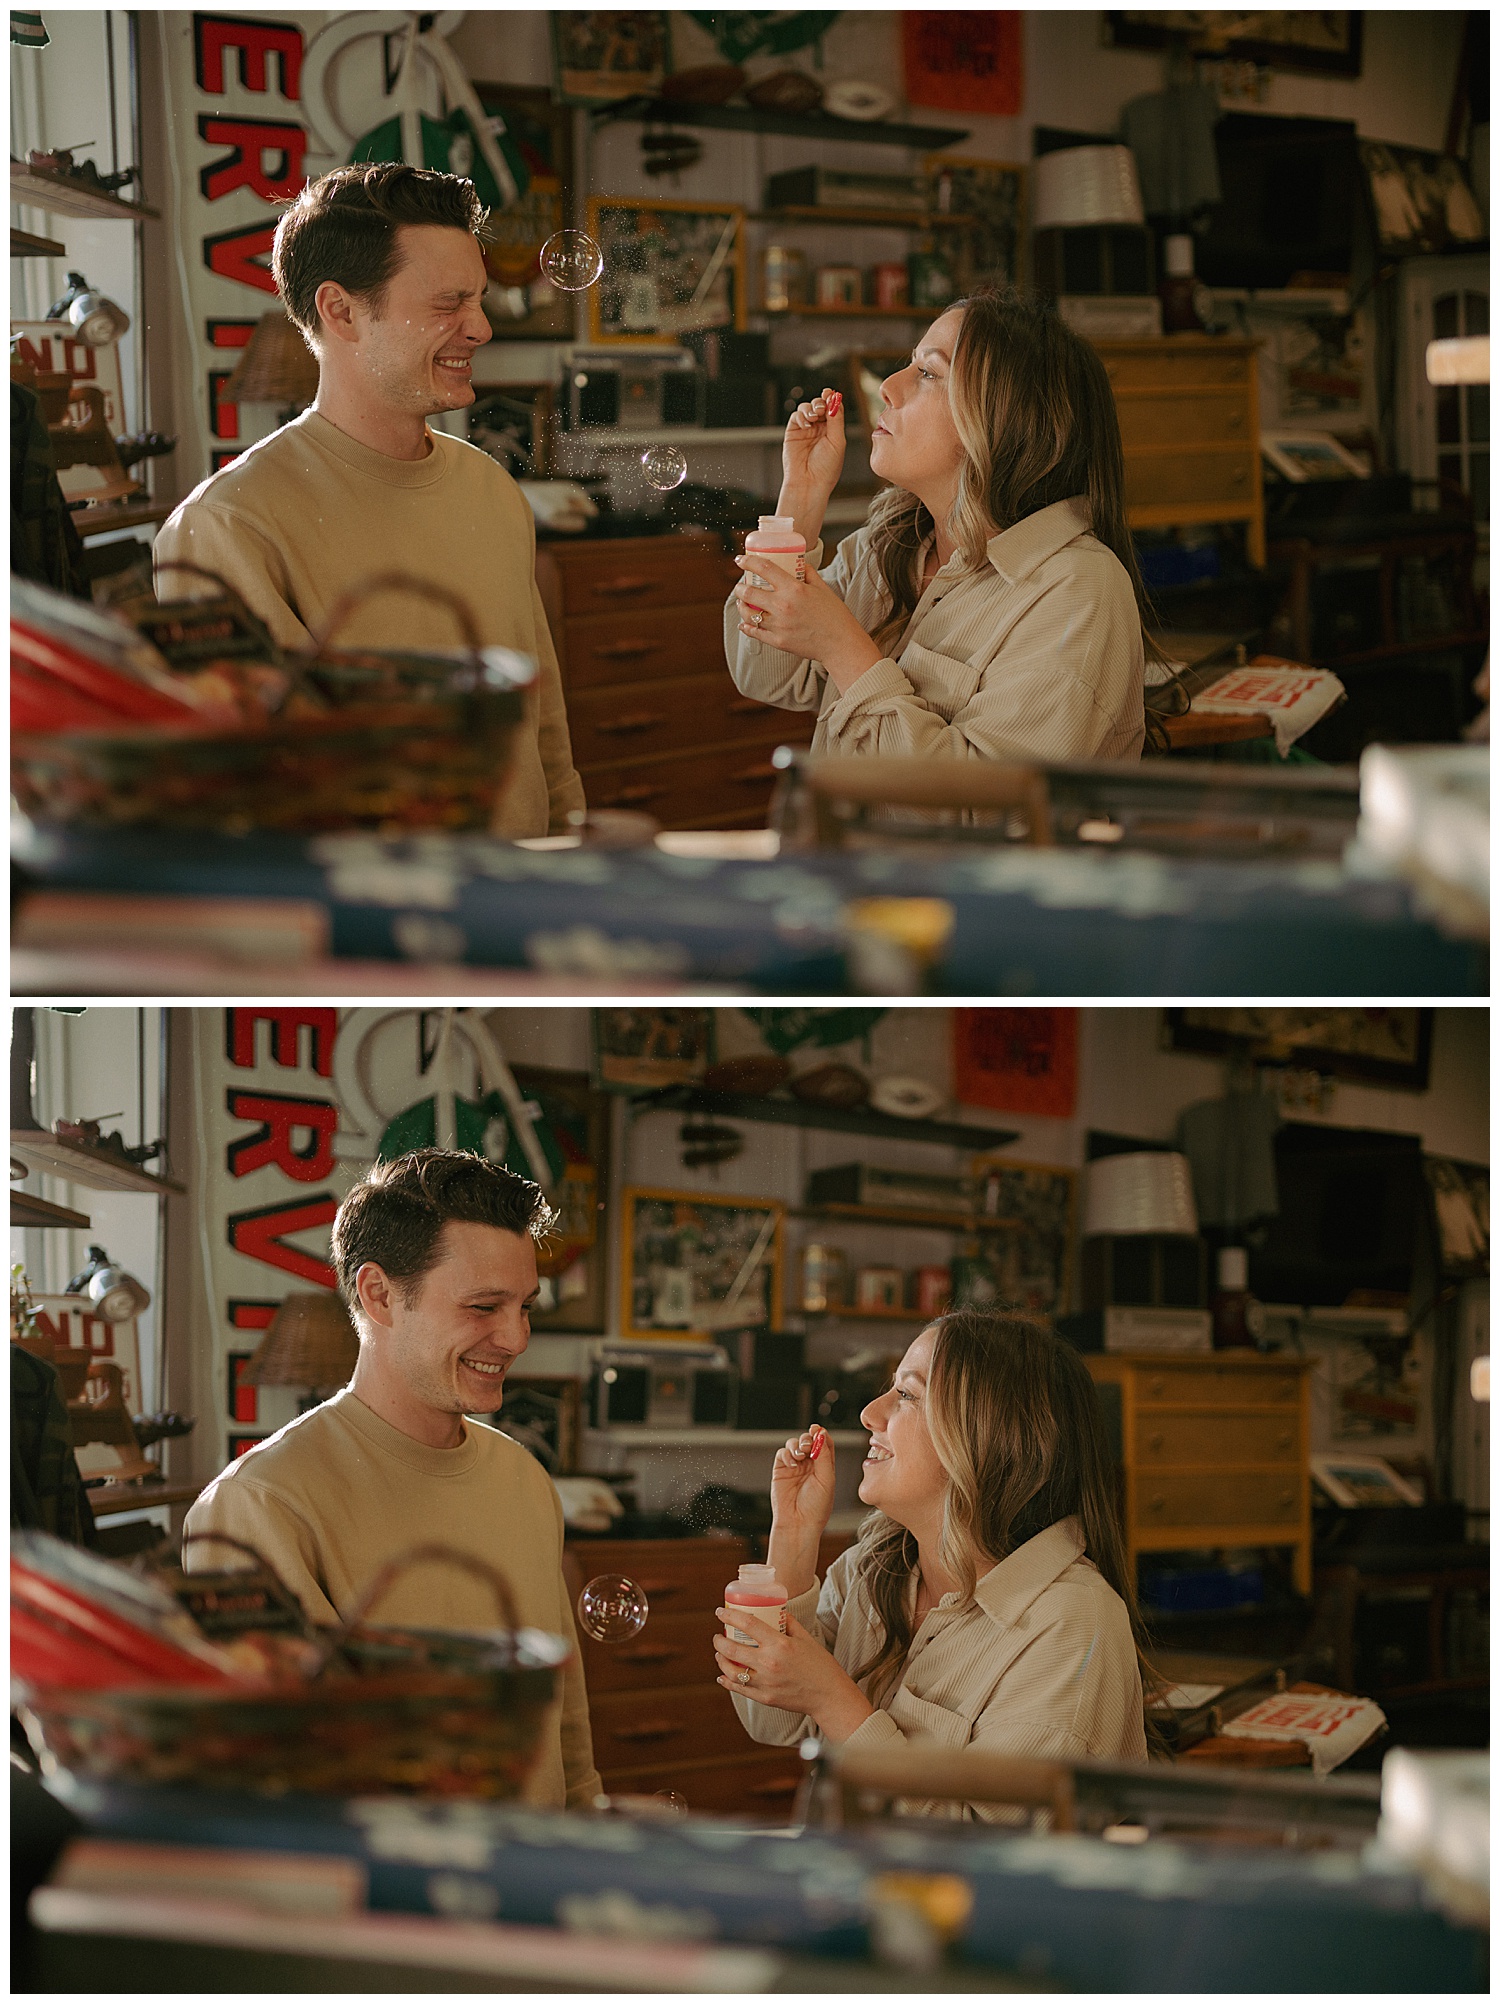 The couple blowing bubbles at each other in the antique store window light